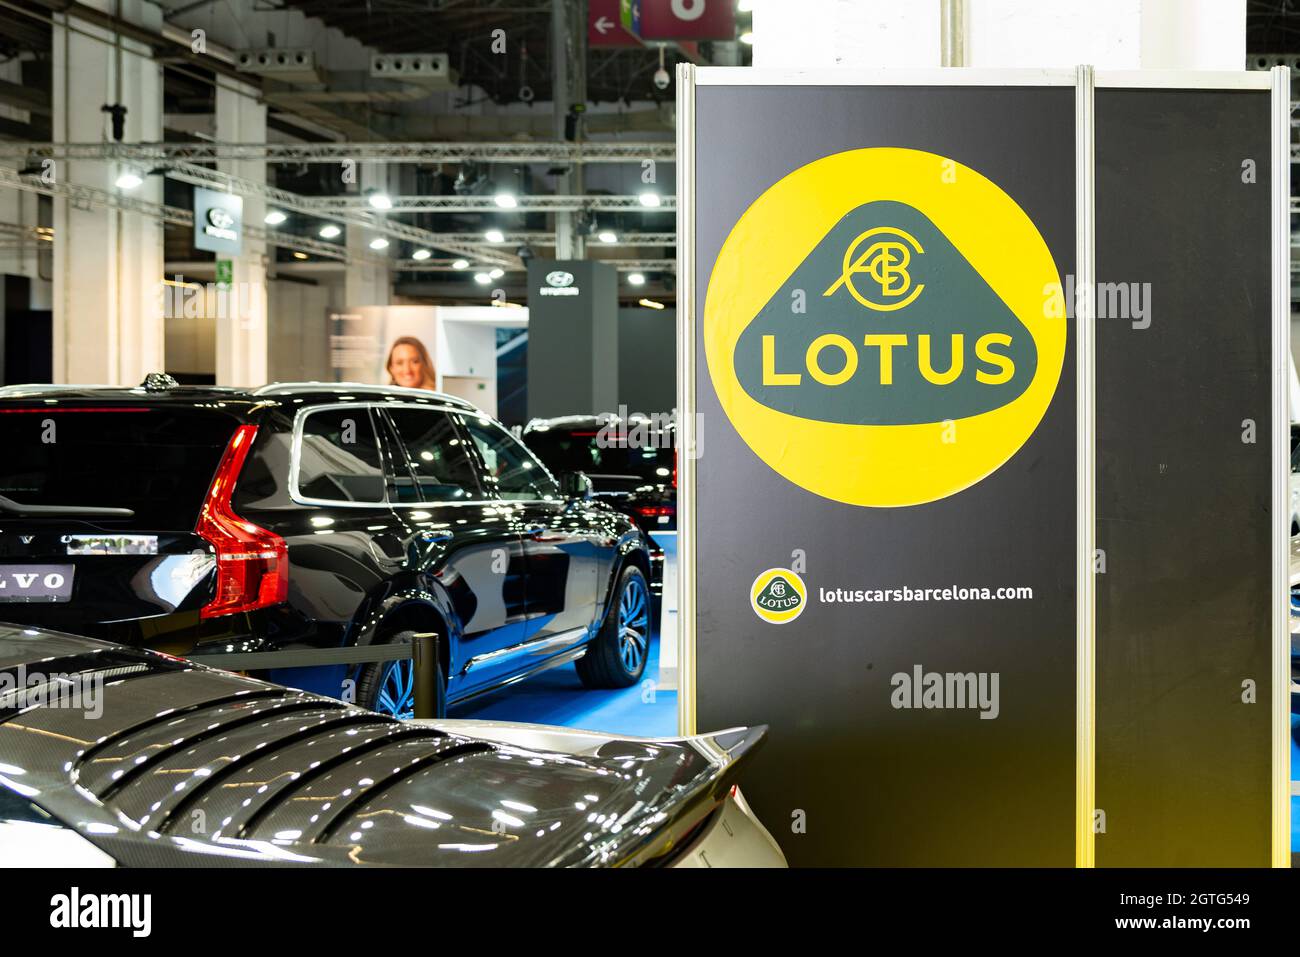 Barcelona, Spain. 30th Sep, 2021. The Lotus car maker logo is seen at the 2021 'Automobile Barcelona' motor show in Barcelona, Spain on September 30, 2021. The Barcelona International Motor Show is an international automotive industry trade fair held annually in the catalan capital. (Photo by Davide Bonaldo/Sipa USA) Credit: Sipa USA/Alamy Live News Stock Photo